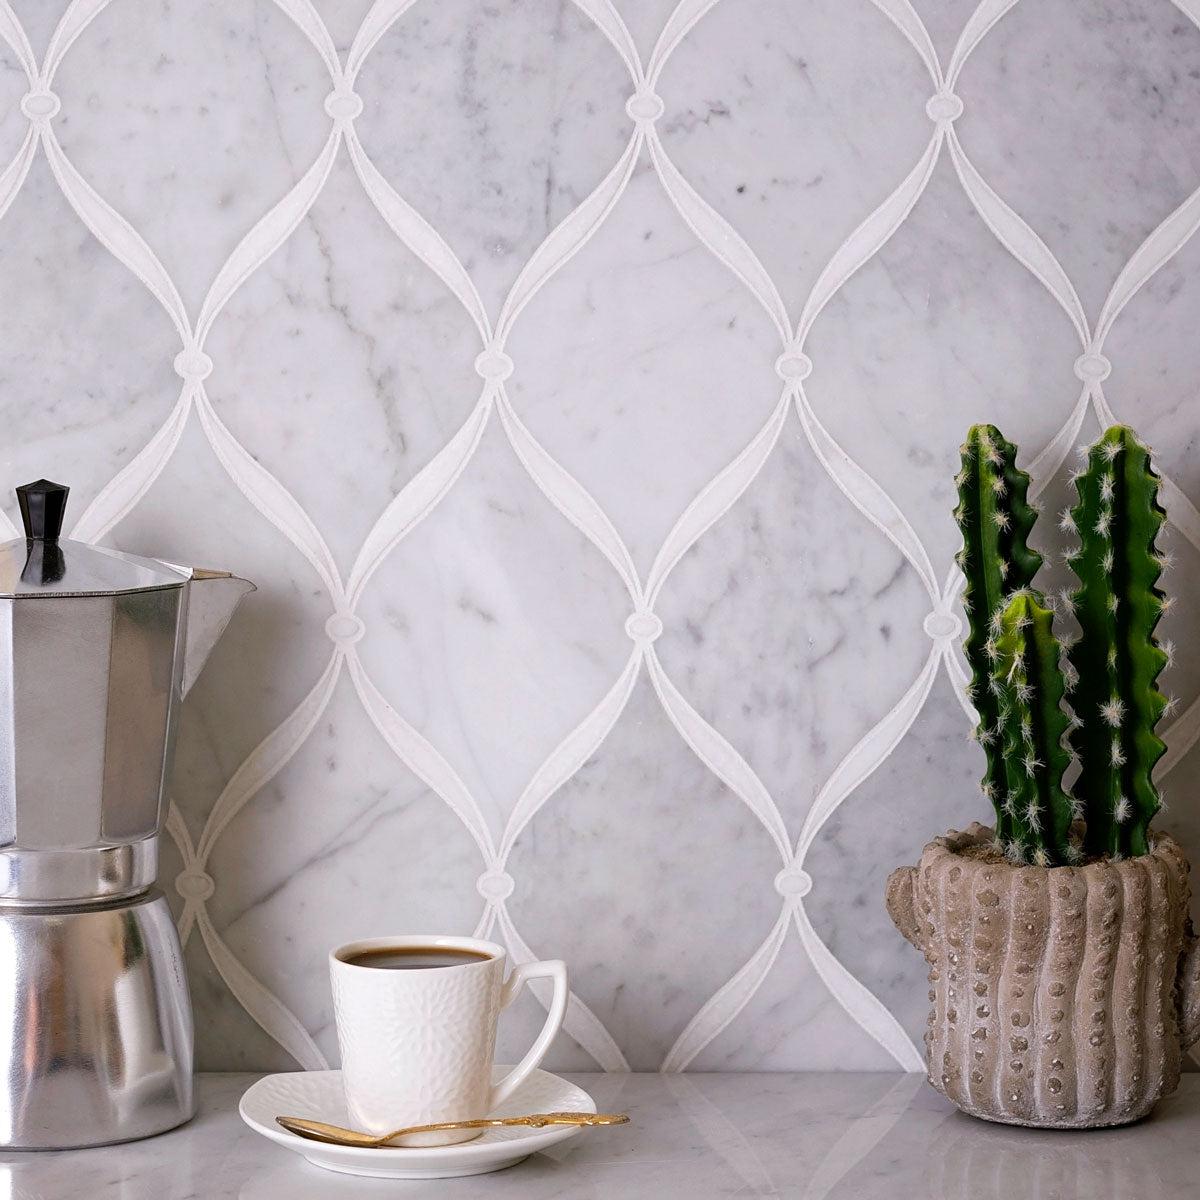 Carrara Chic With Thassos Dots Marble Mosaic Tile